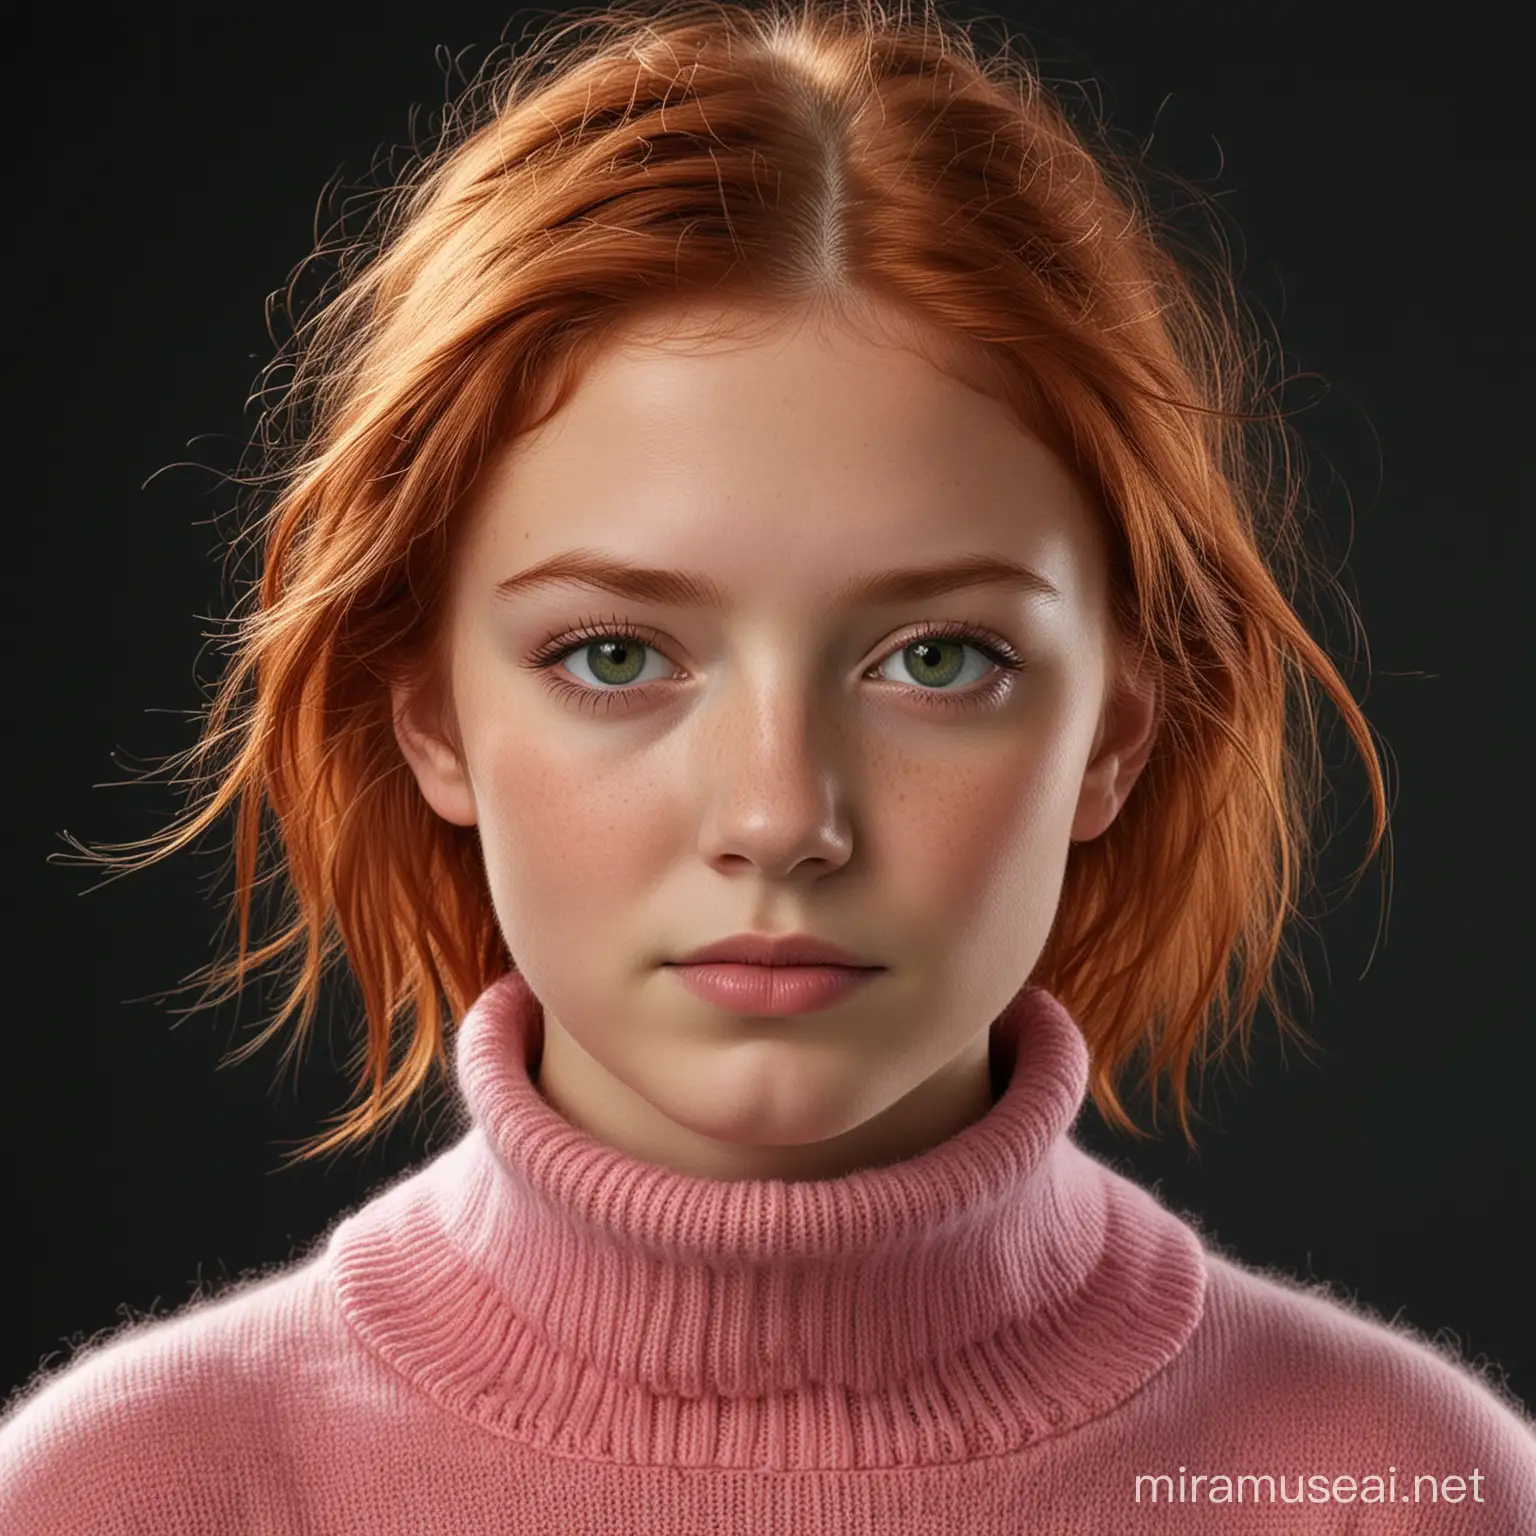 Vibrant Portrait of a Natural Redhead Girl in Pink Knitwear Against Black Background